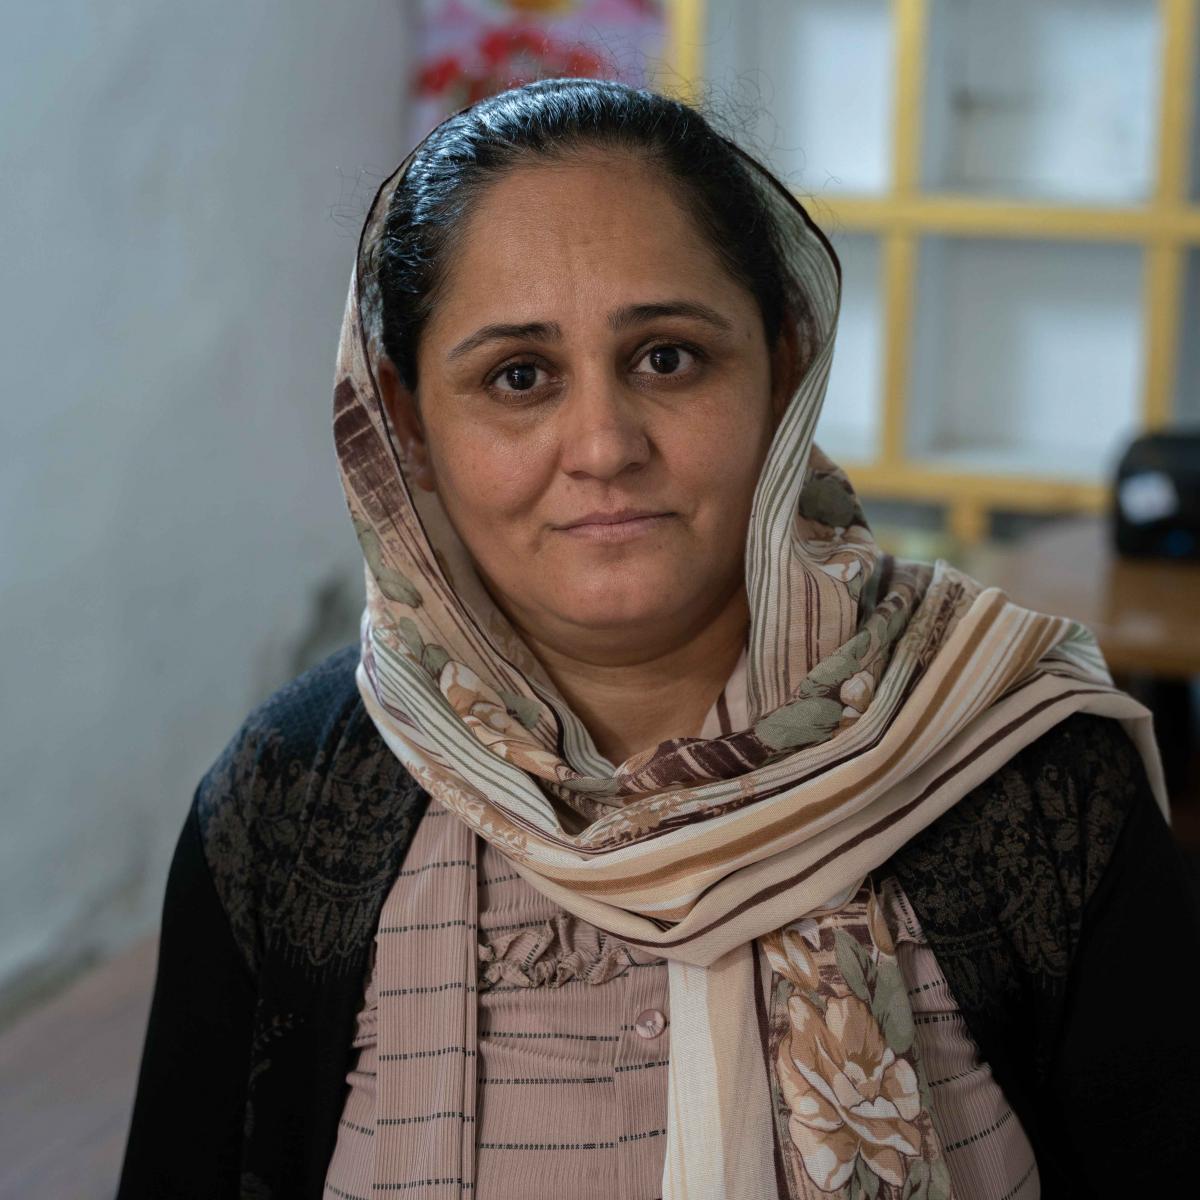 Nadia, 43, has opened her own homemade Iraqi pastry shop with support from USAID.